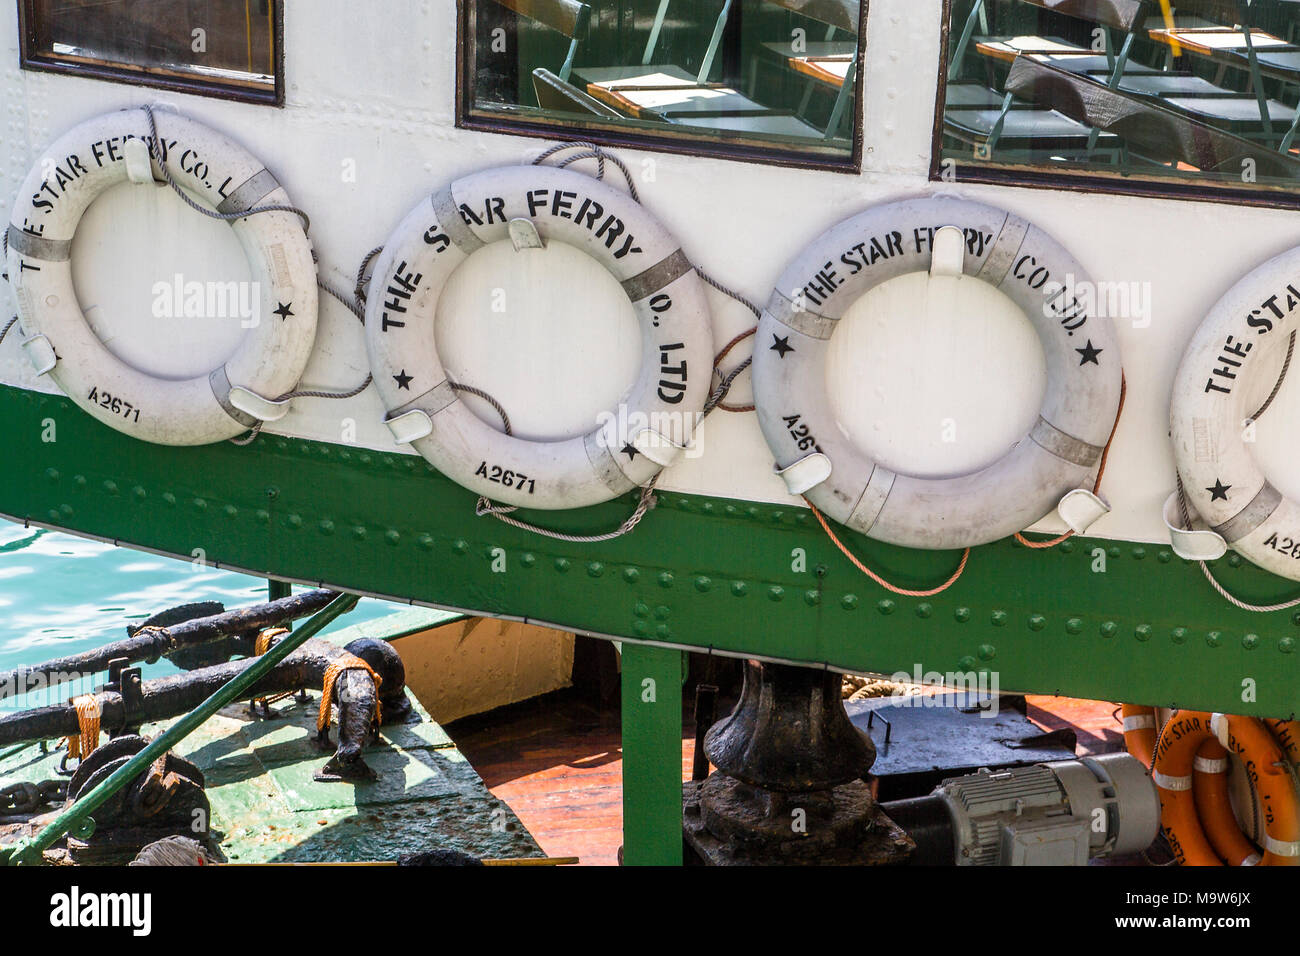 Iconic detail of the Star Ferry life belts. The Star Ferry has been transporting  passengers between Hong Kong Island to Kowloon since 1888. Stock Photo